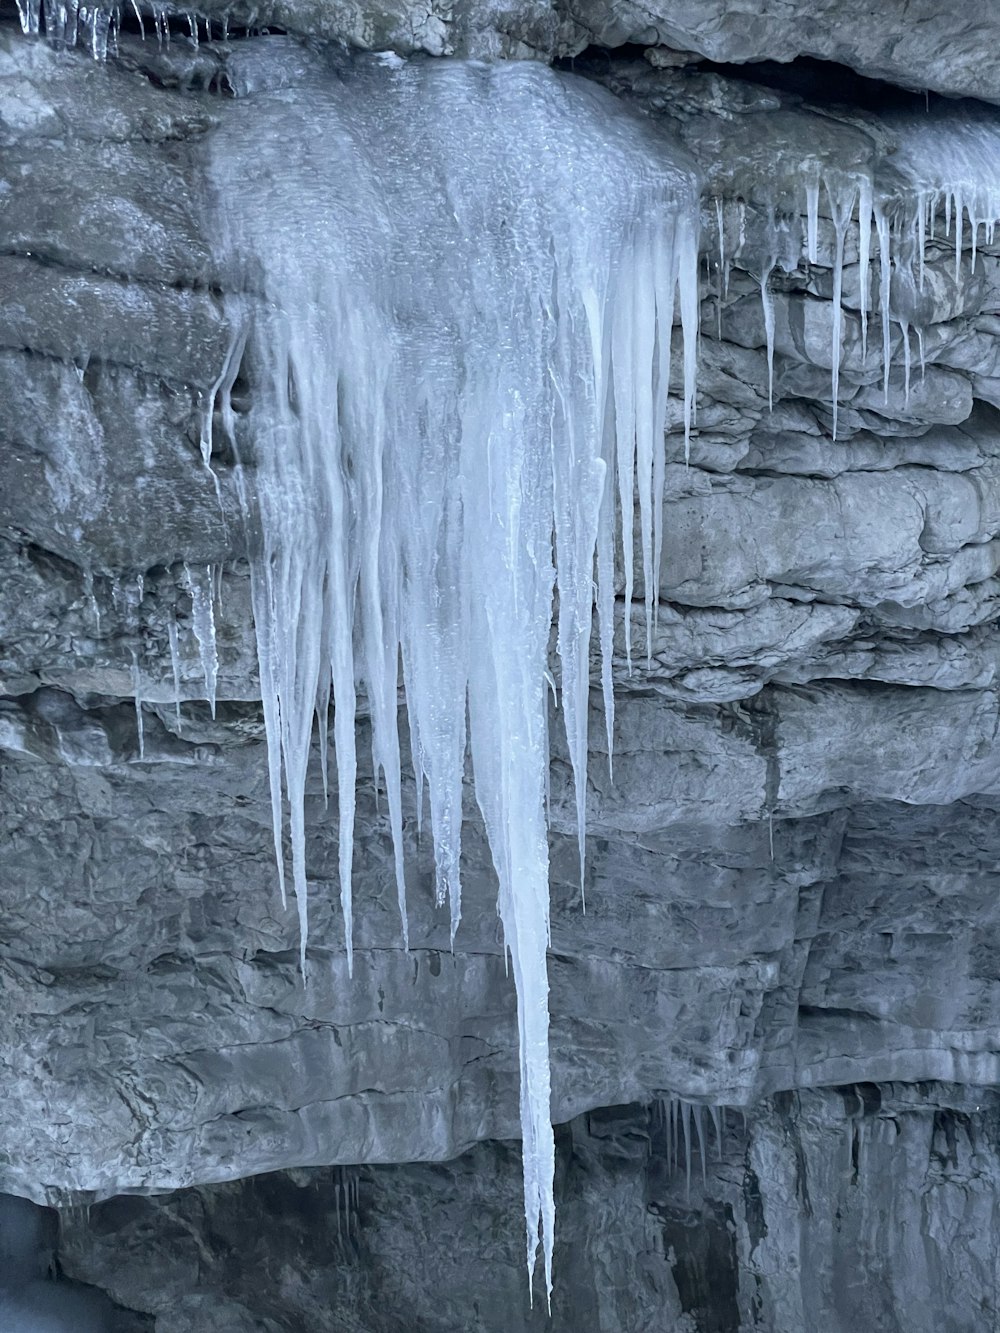 icicles hanging from the side of a cliff